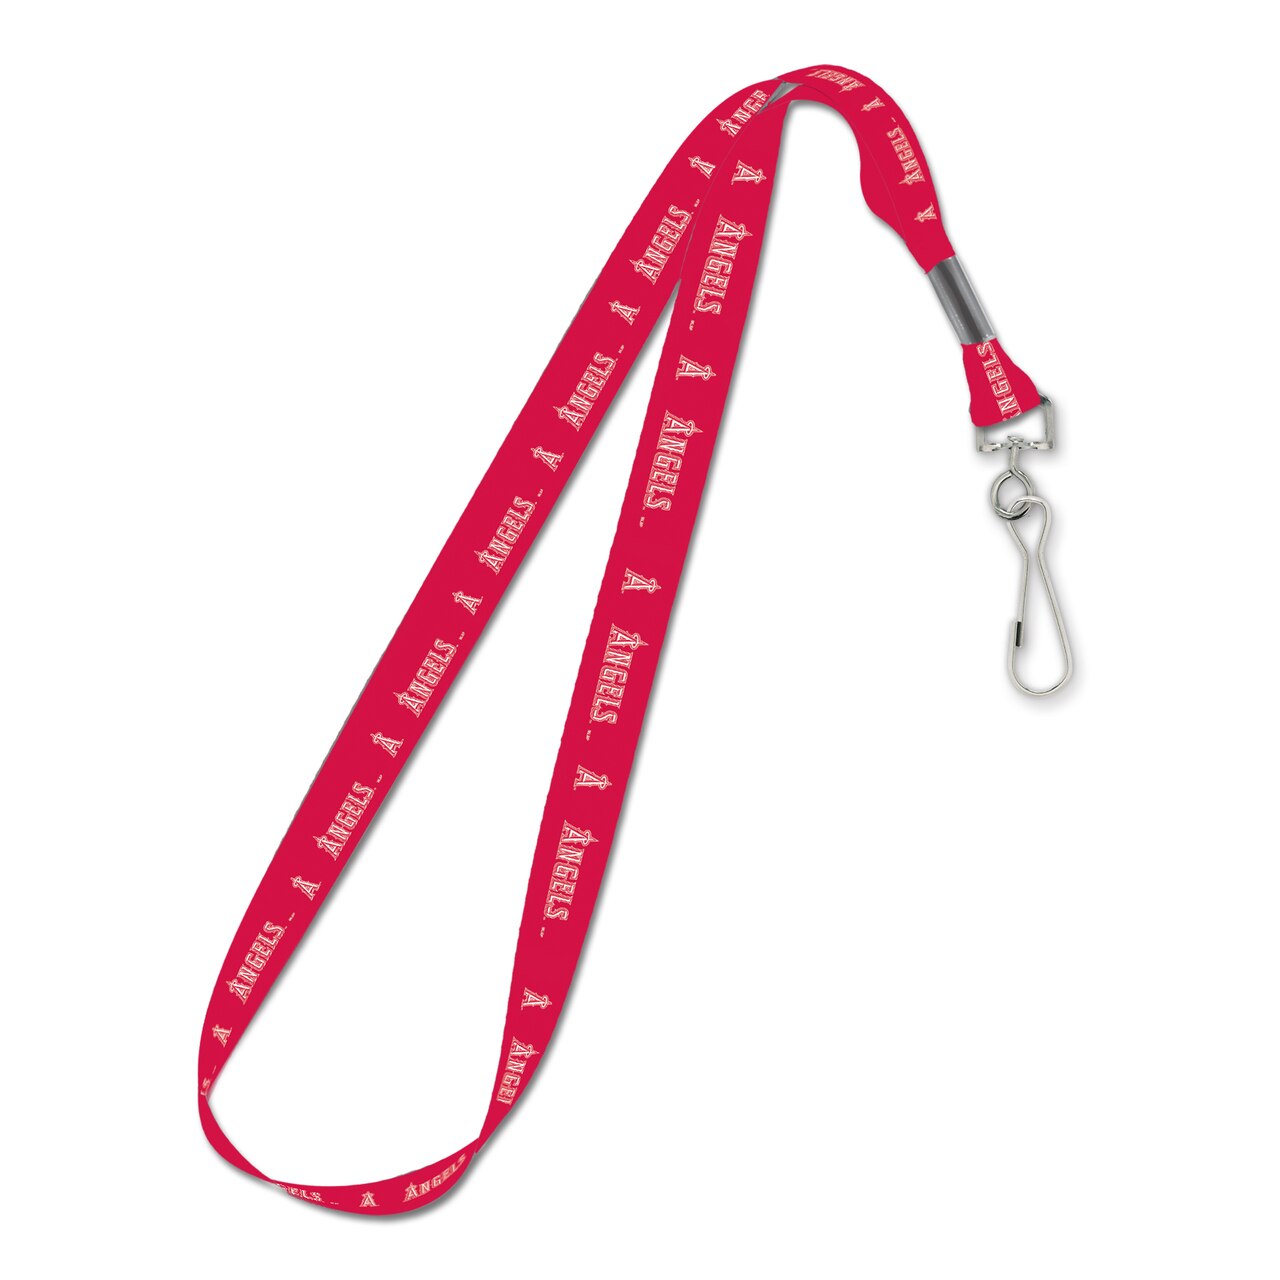 Los Angeles Angels Lanyard 3/4 Inch by Wincraft